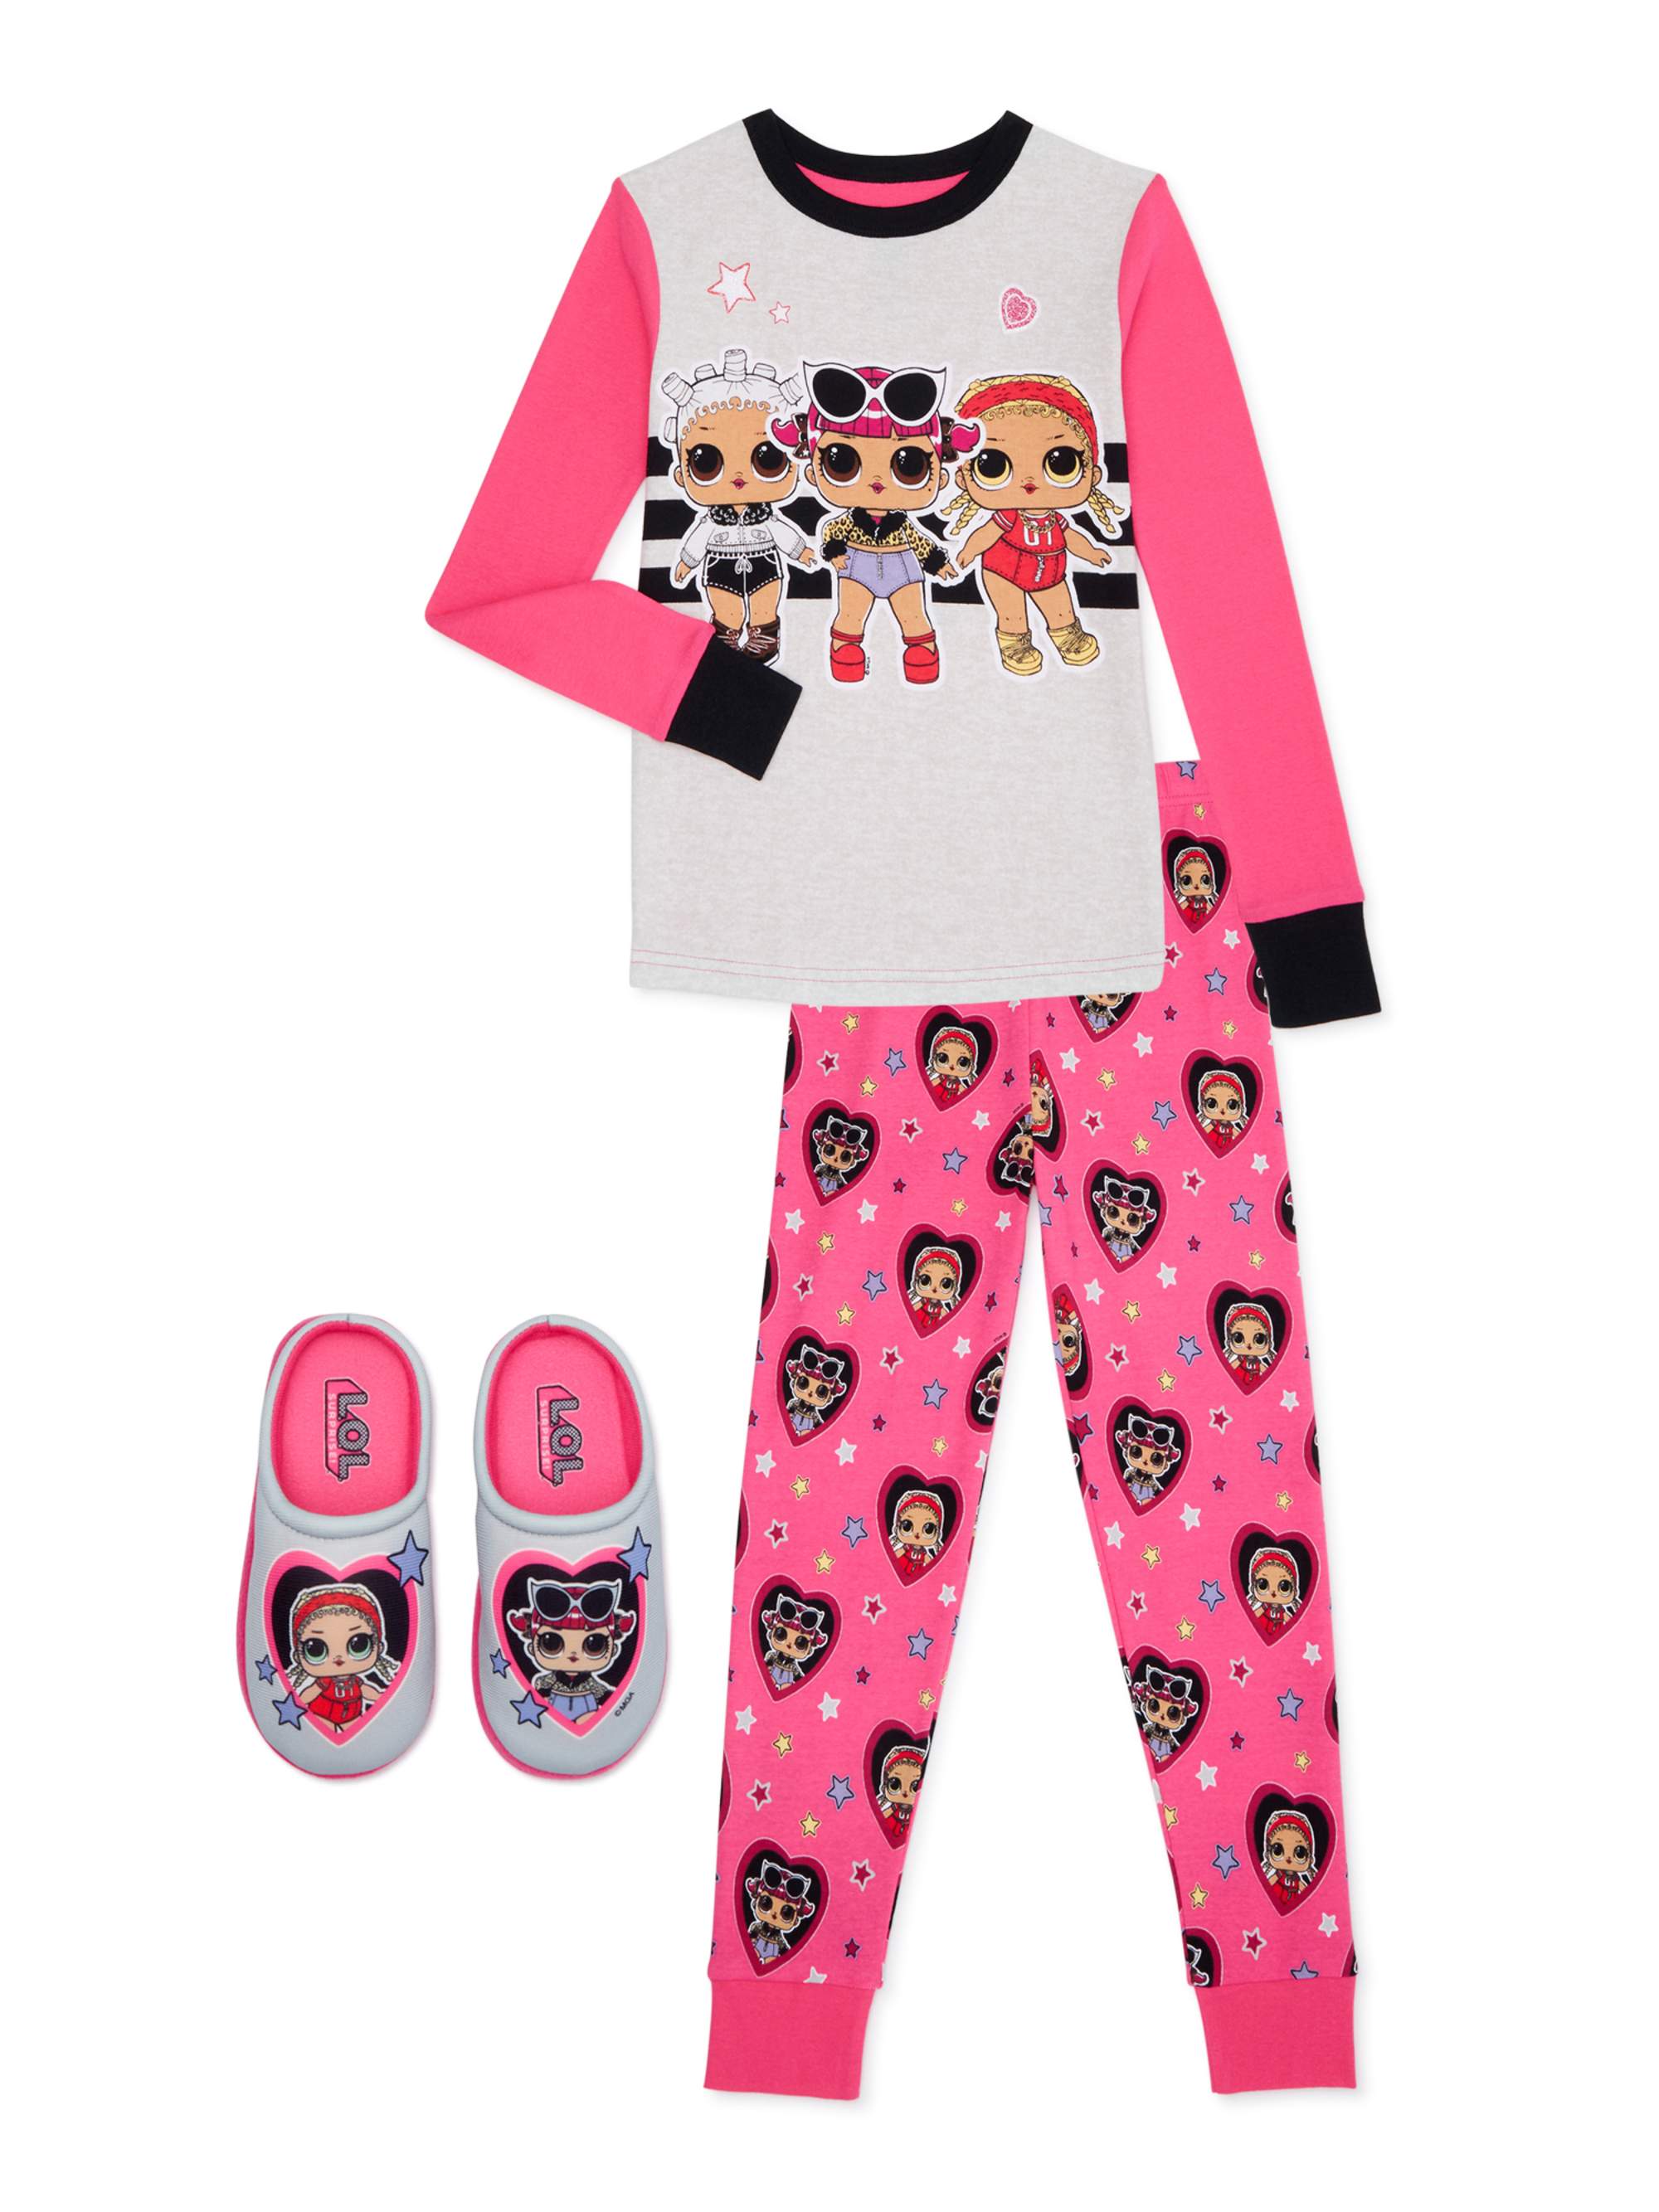 L.O.L Surprise! Girls 2-Piece Pajama Set with Slipper Sizes 4-12 - image 1 of 3